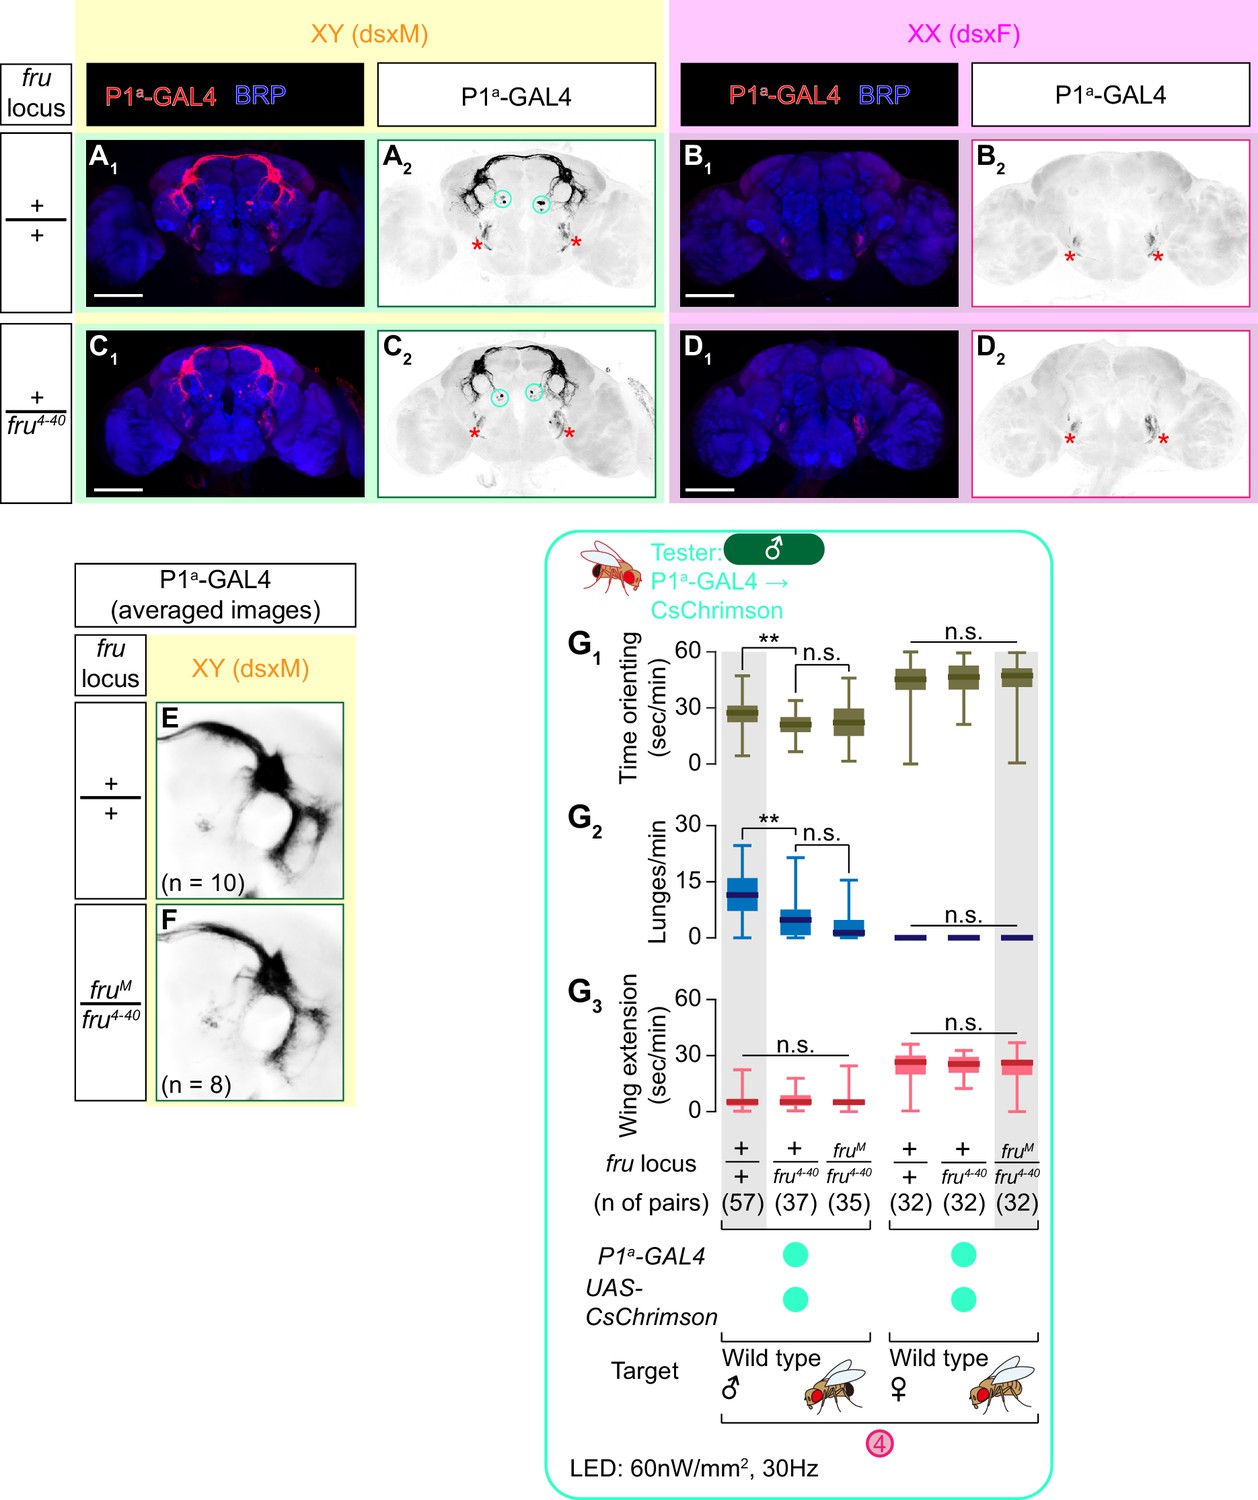 Sex Determining Genes Distinctly Regulate Courtship Capability And Target Preference Via Sexually Dimorphic Neurons Elife